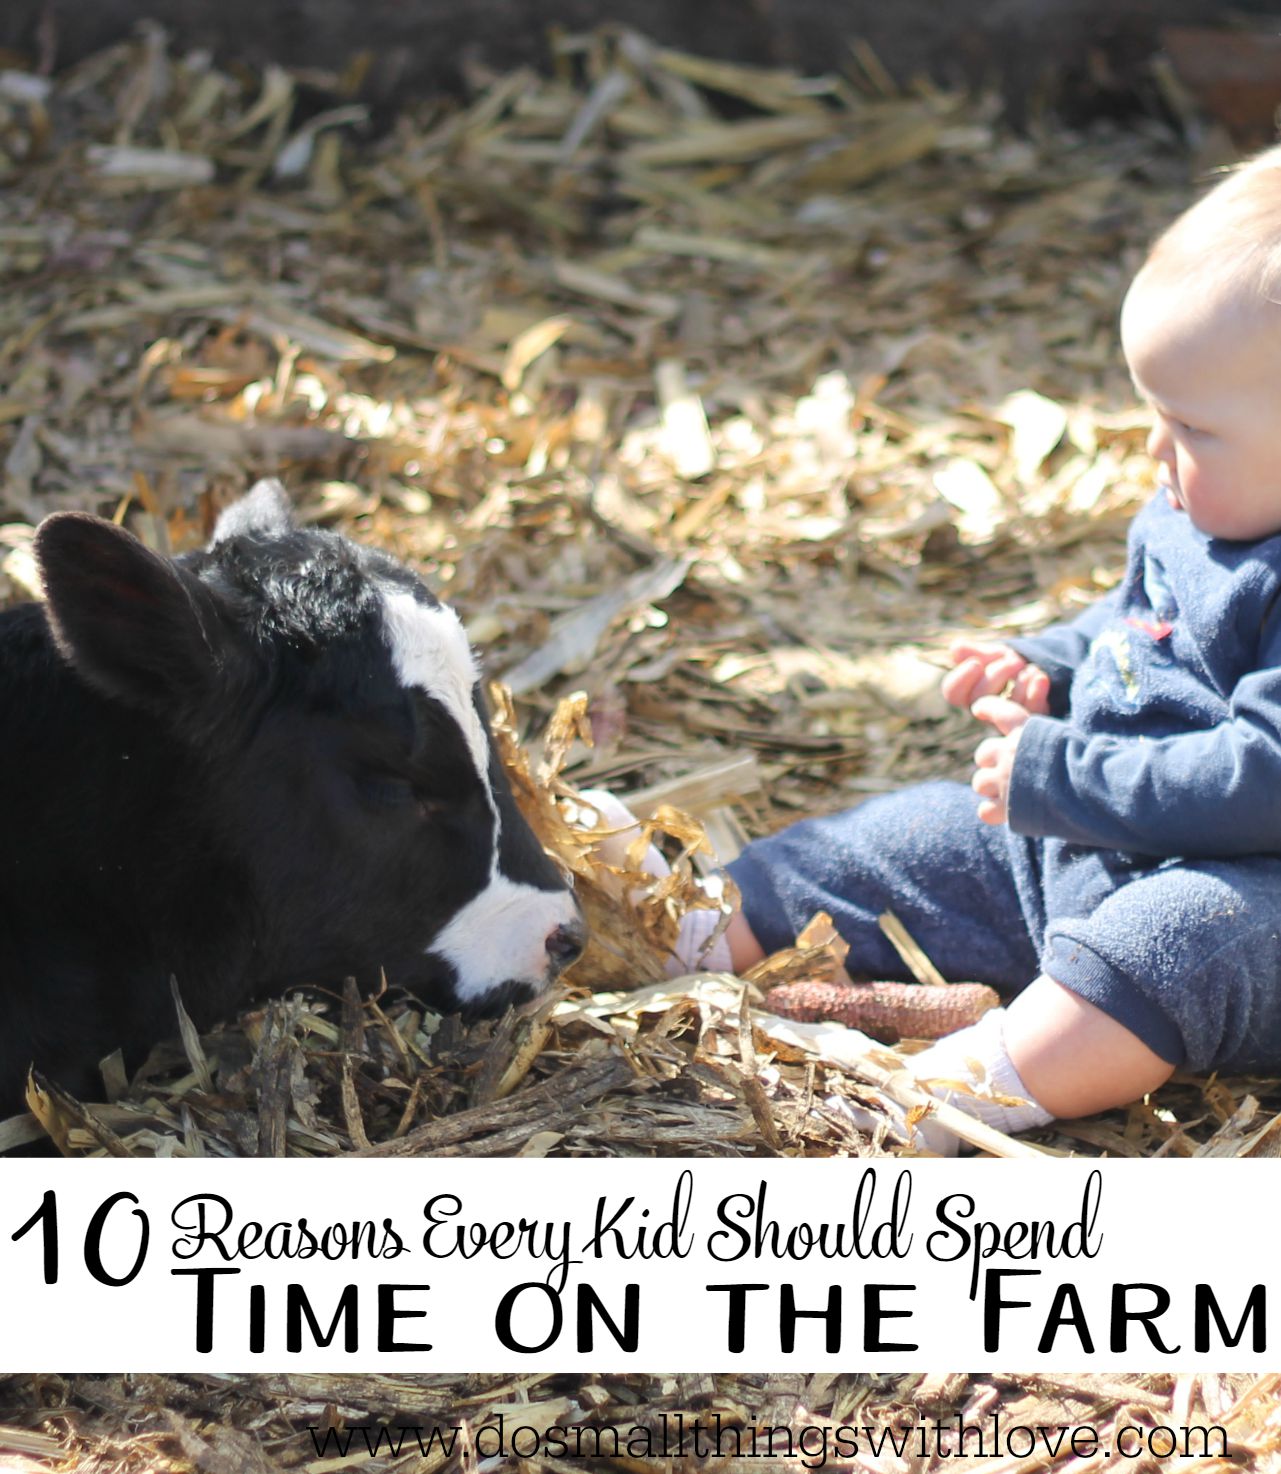 10 reasons every kid should spend some time on the farm